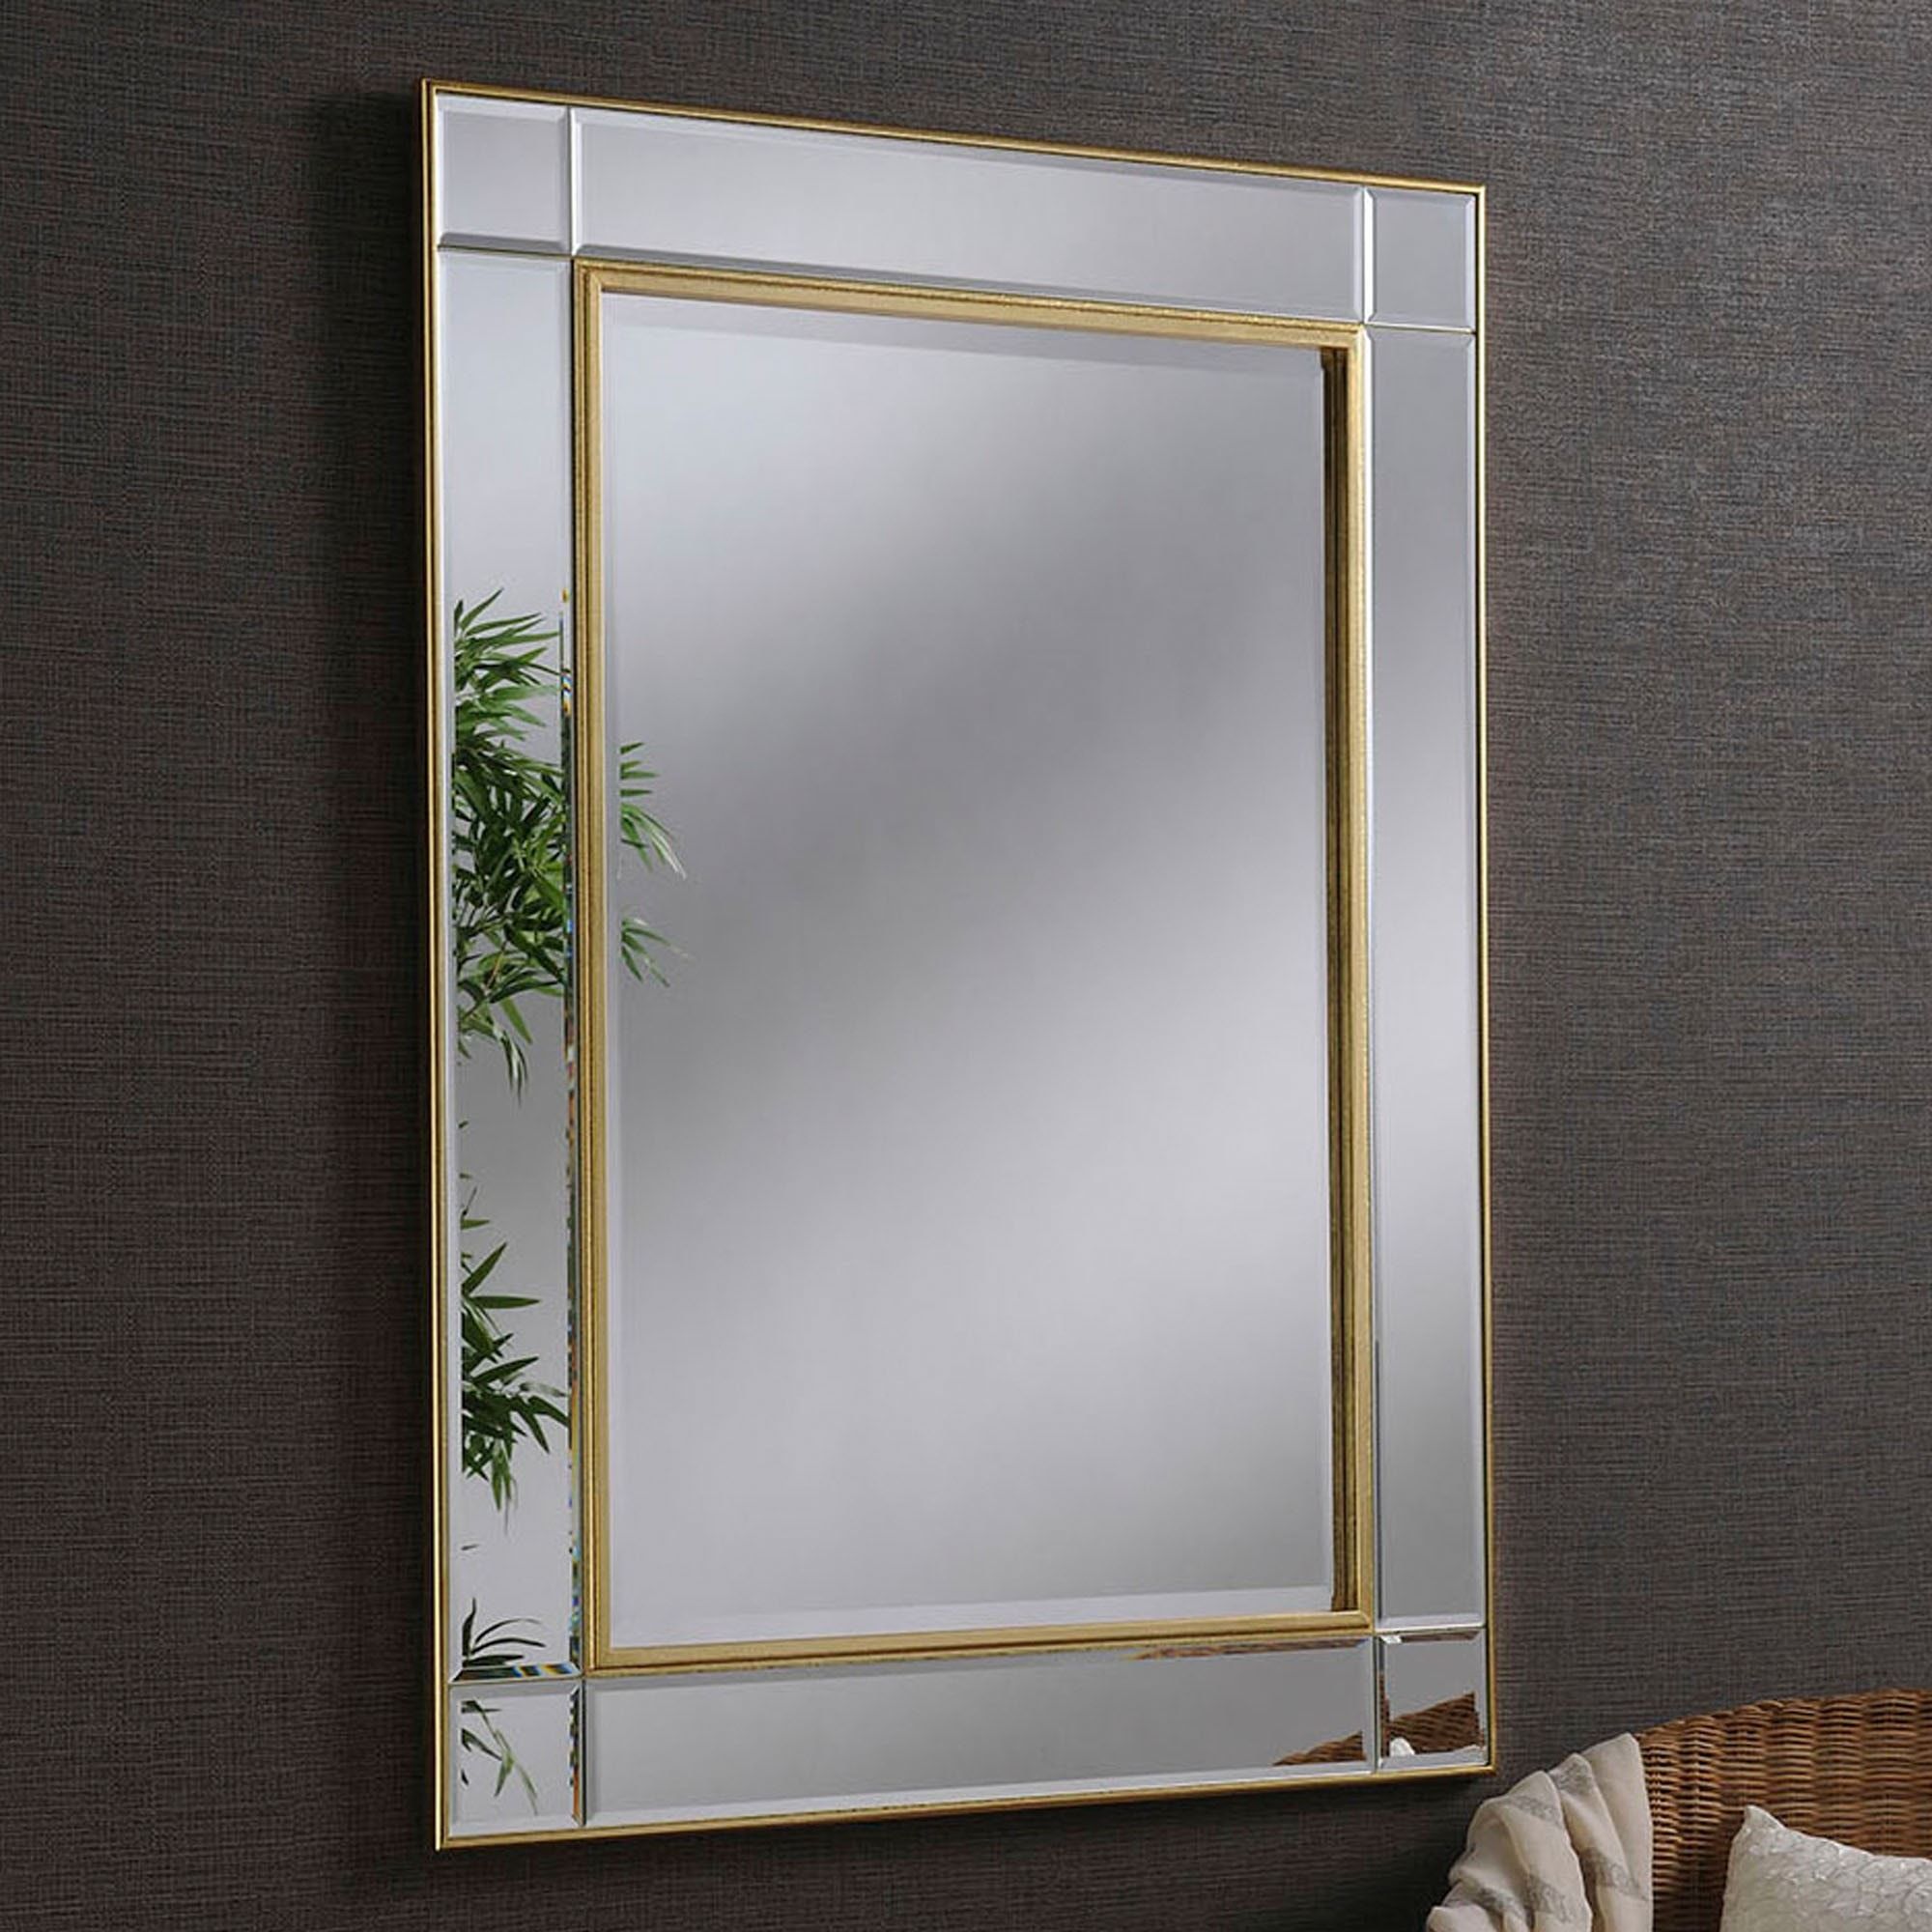 Contemporary Gold Beveled Wall Mirror | Contemporary Wall Mirrors Within Sartain Modern &amp; Contemporary Wall Mirrors (View 3 of 15)